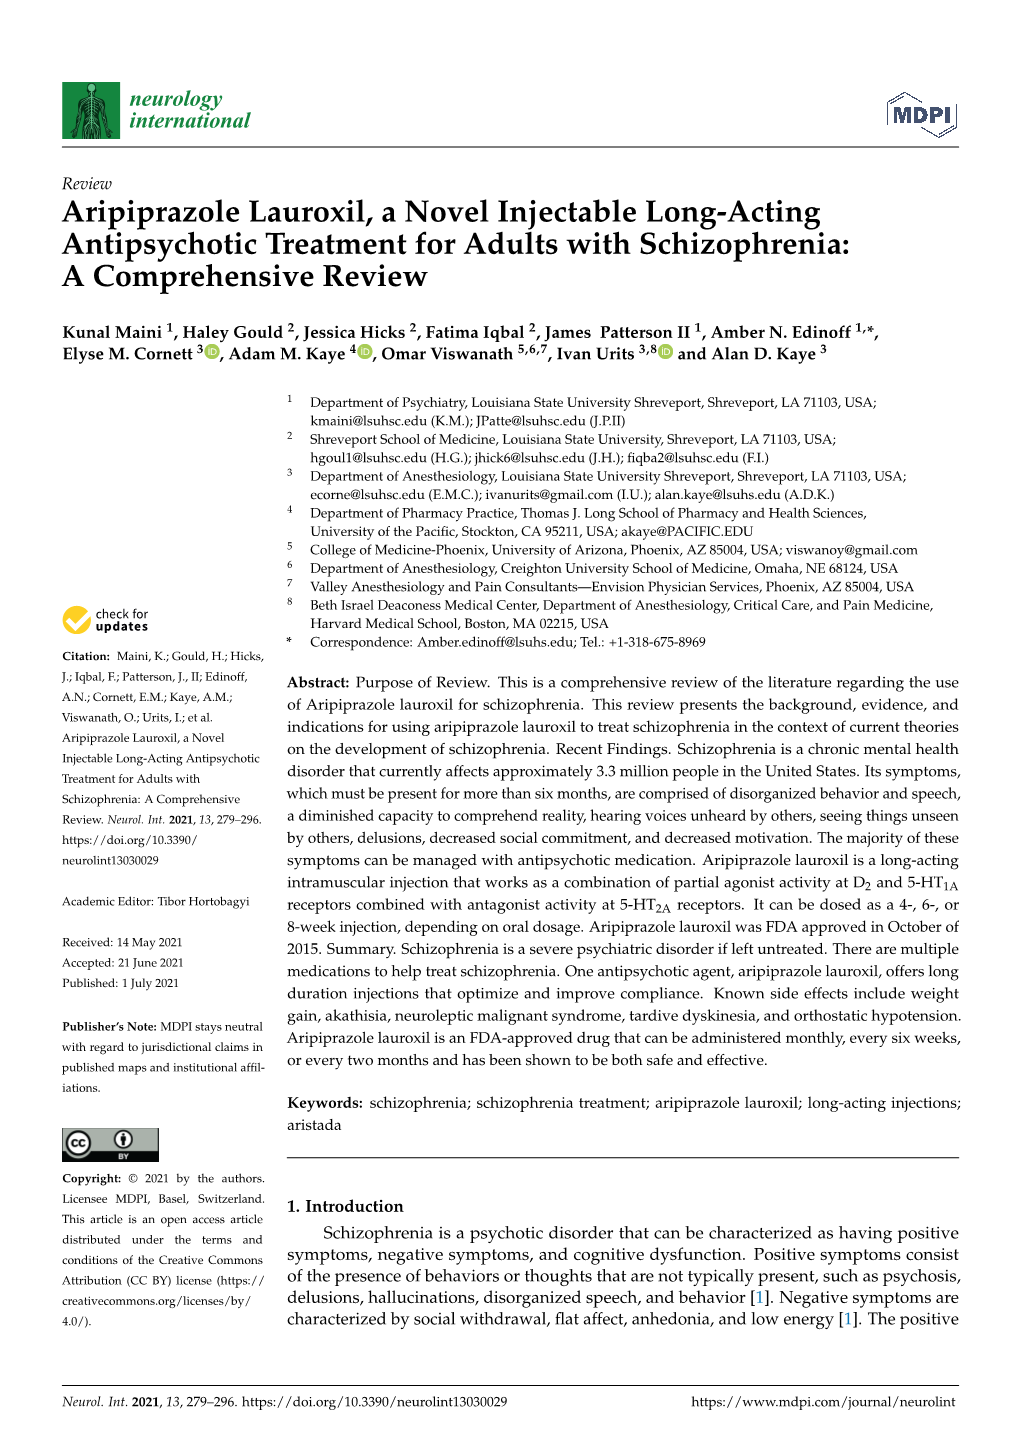 Aripiprazole Lauroxil, a Novel Injectable Long-Acting Antipsychotic Treatment for Adults with Schizophrenia: a Comprehensive Review